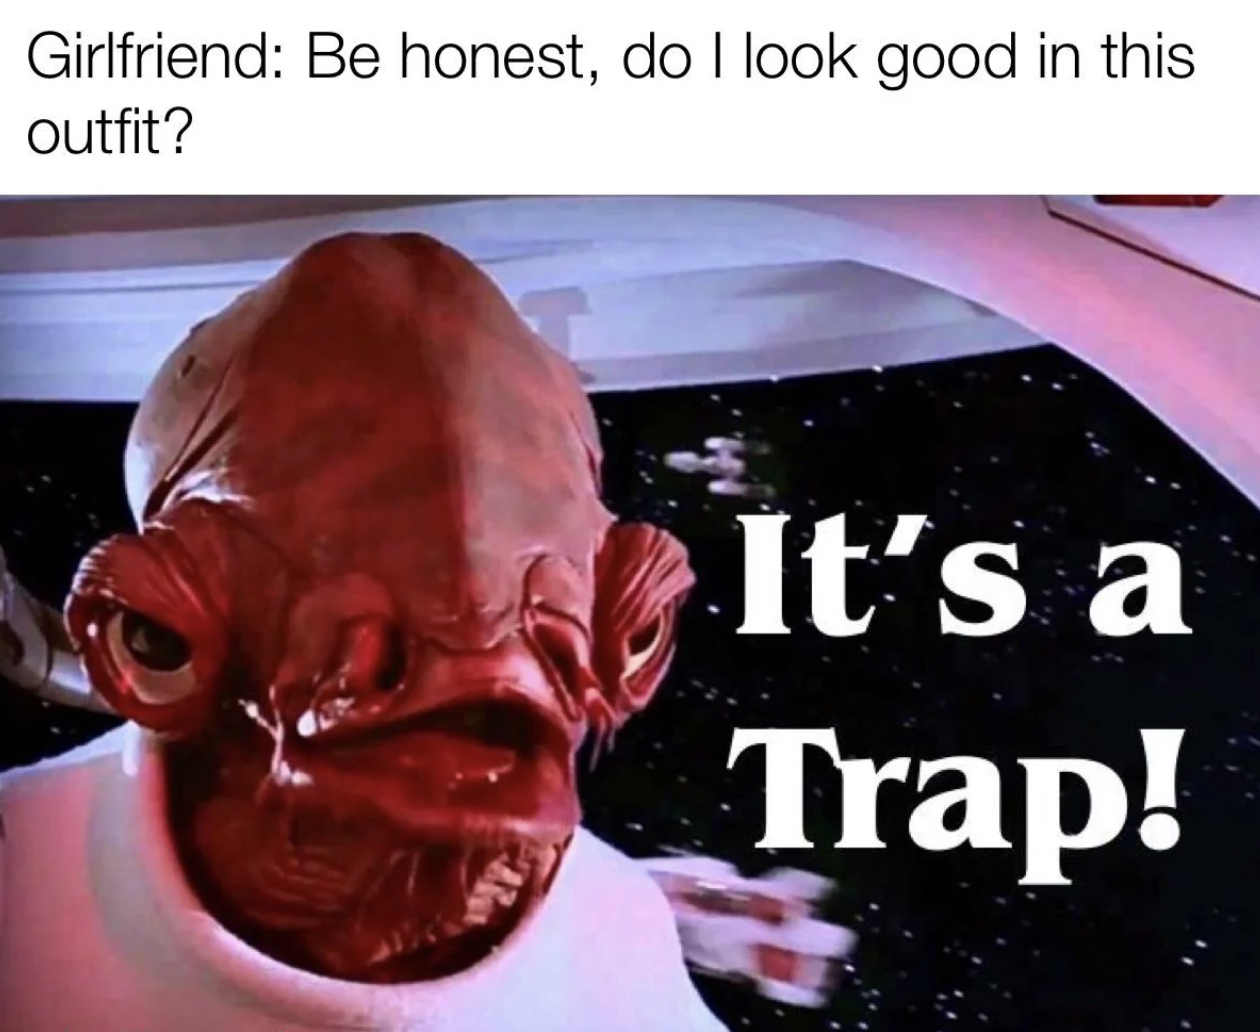 photo caption - Girlfriend Be honest, do I look good in this outfit? It's a Trap!